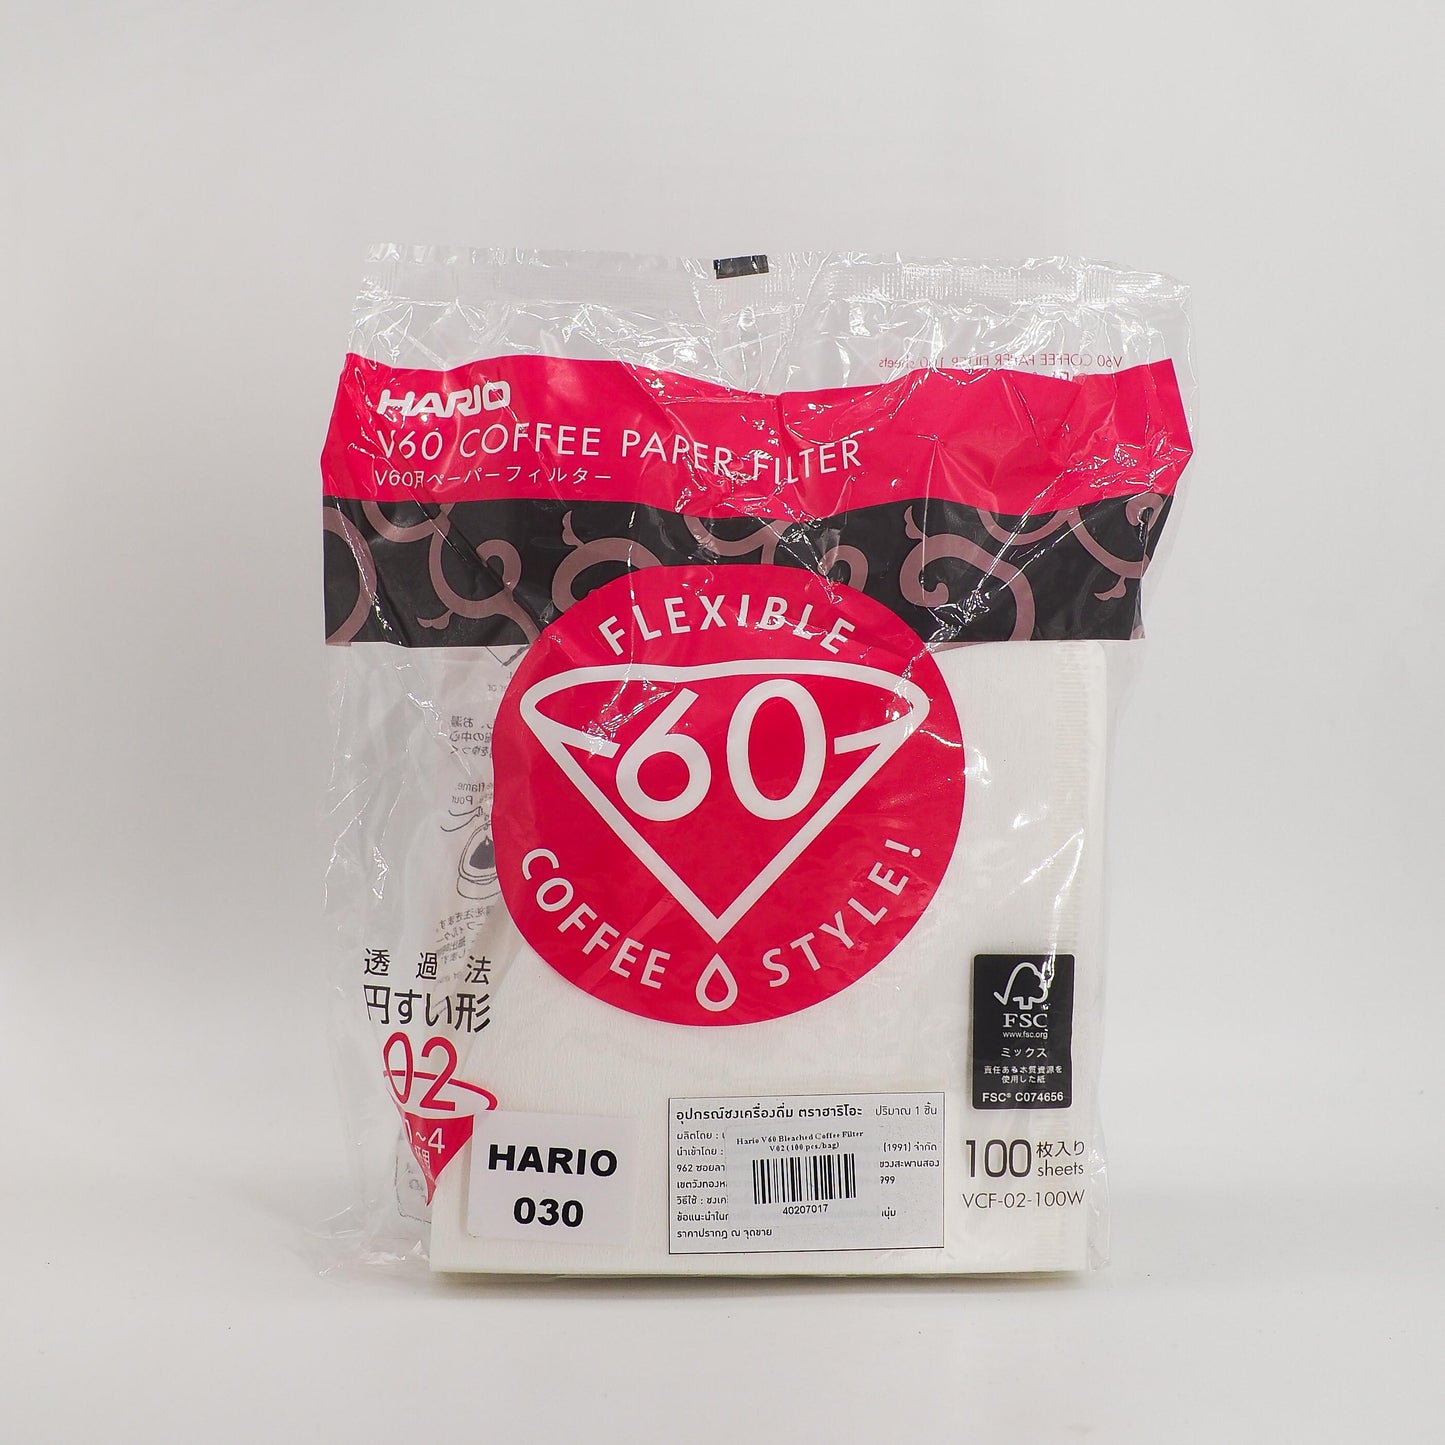 Coffee Paper Filter (100 sheets) - Hario V60 (02)